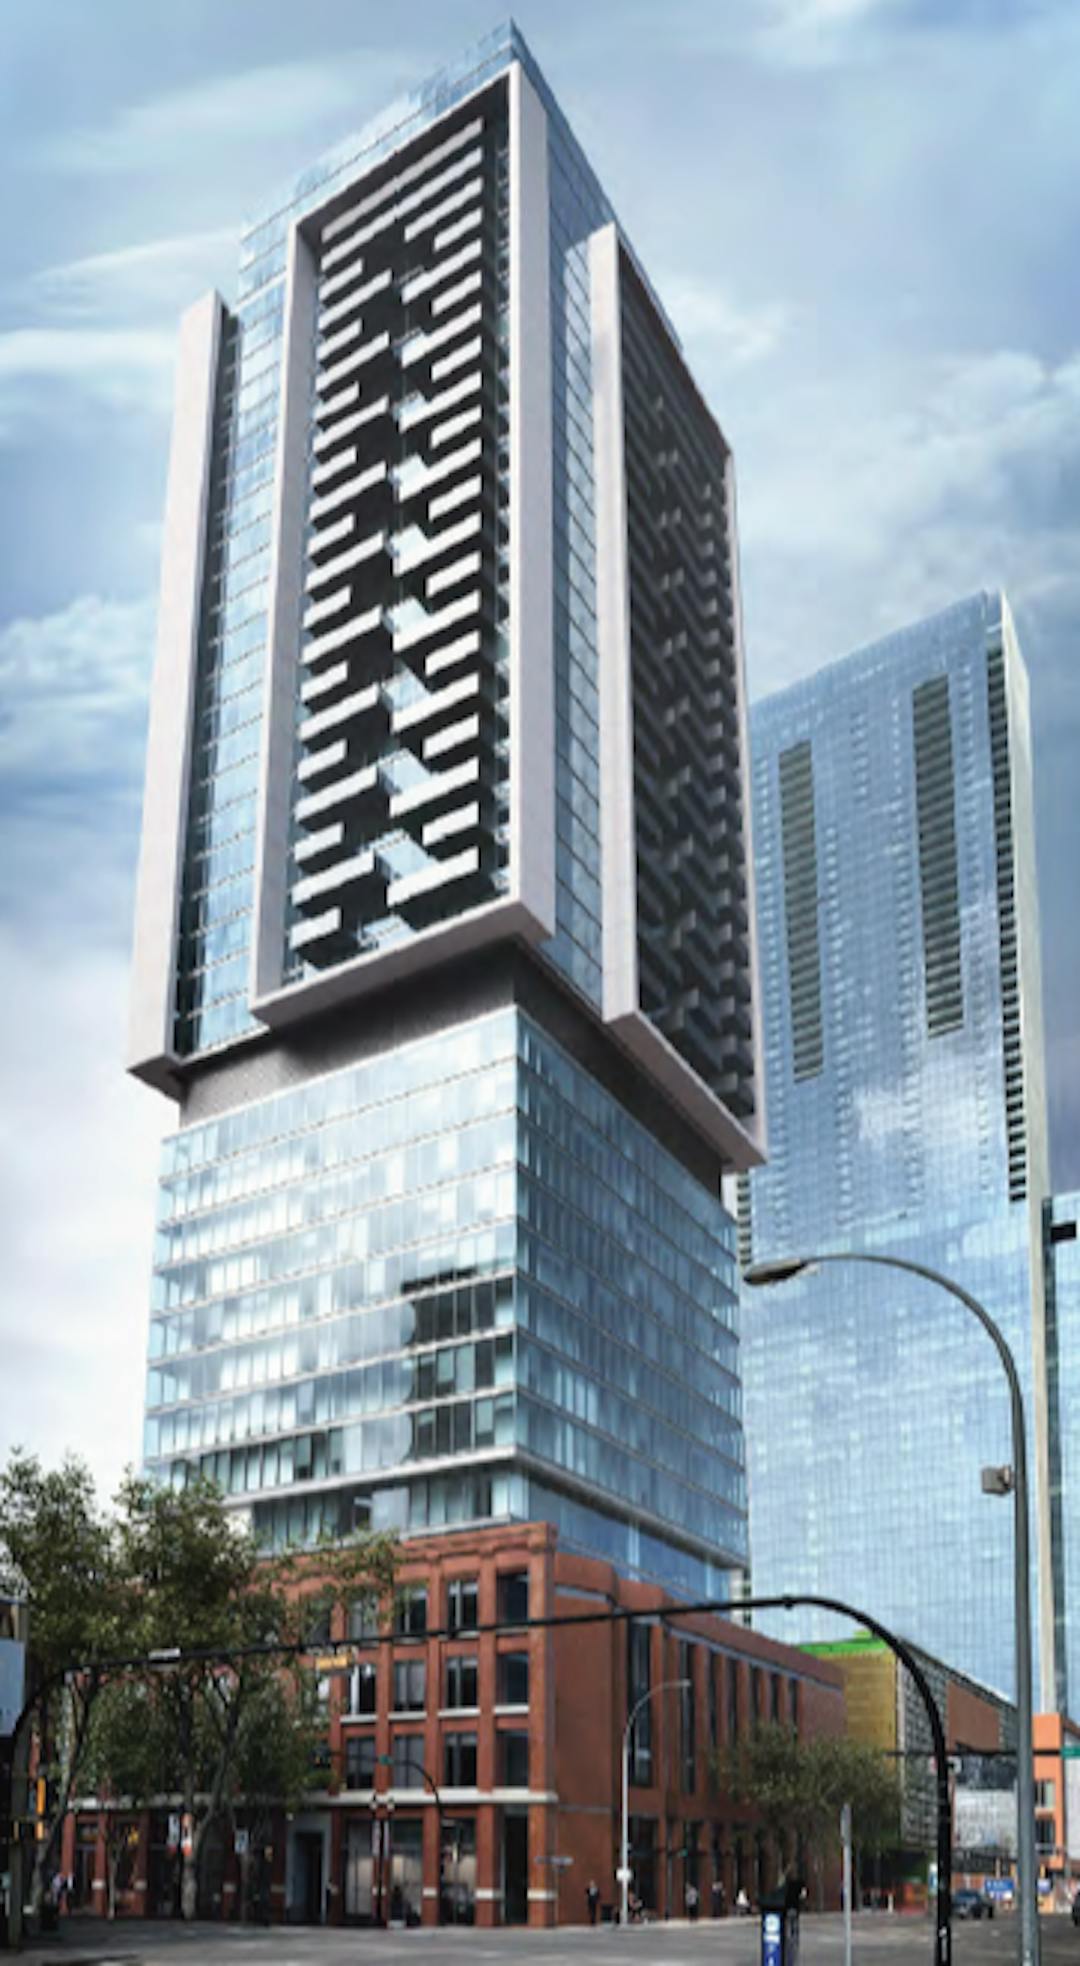 A colour rendering of the proposed La Reina tower (in the foreground), looking upwards from the corner of the building, at a street level view.  Stantec tower (already built) is in the background, to the right.